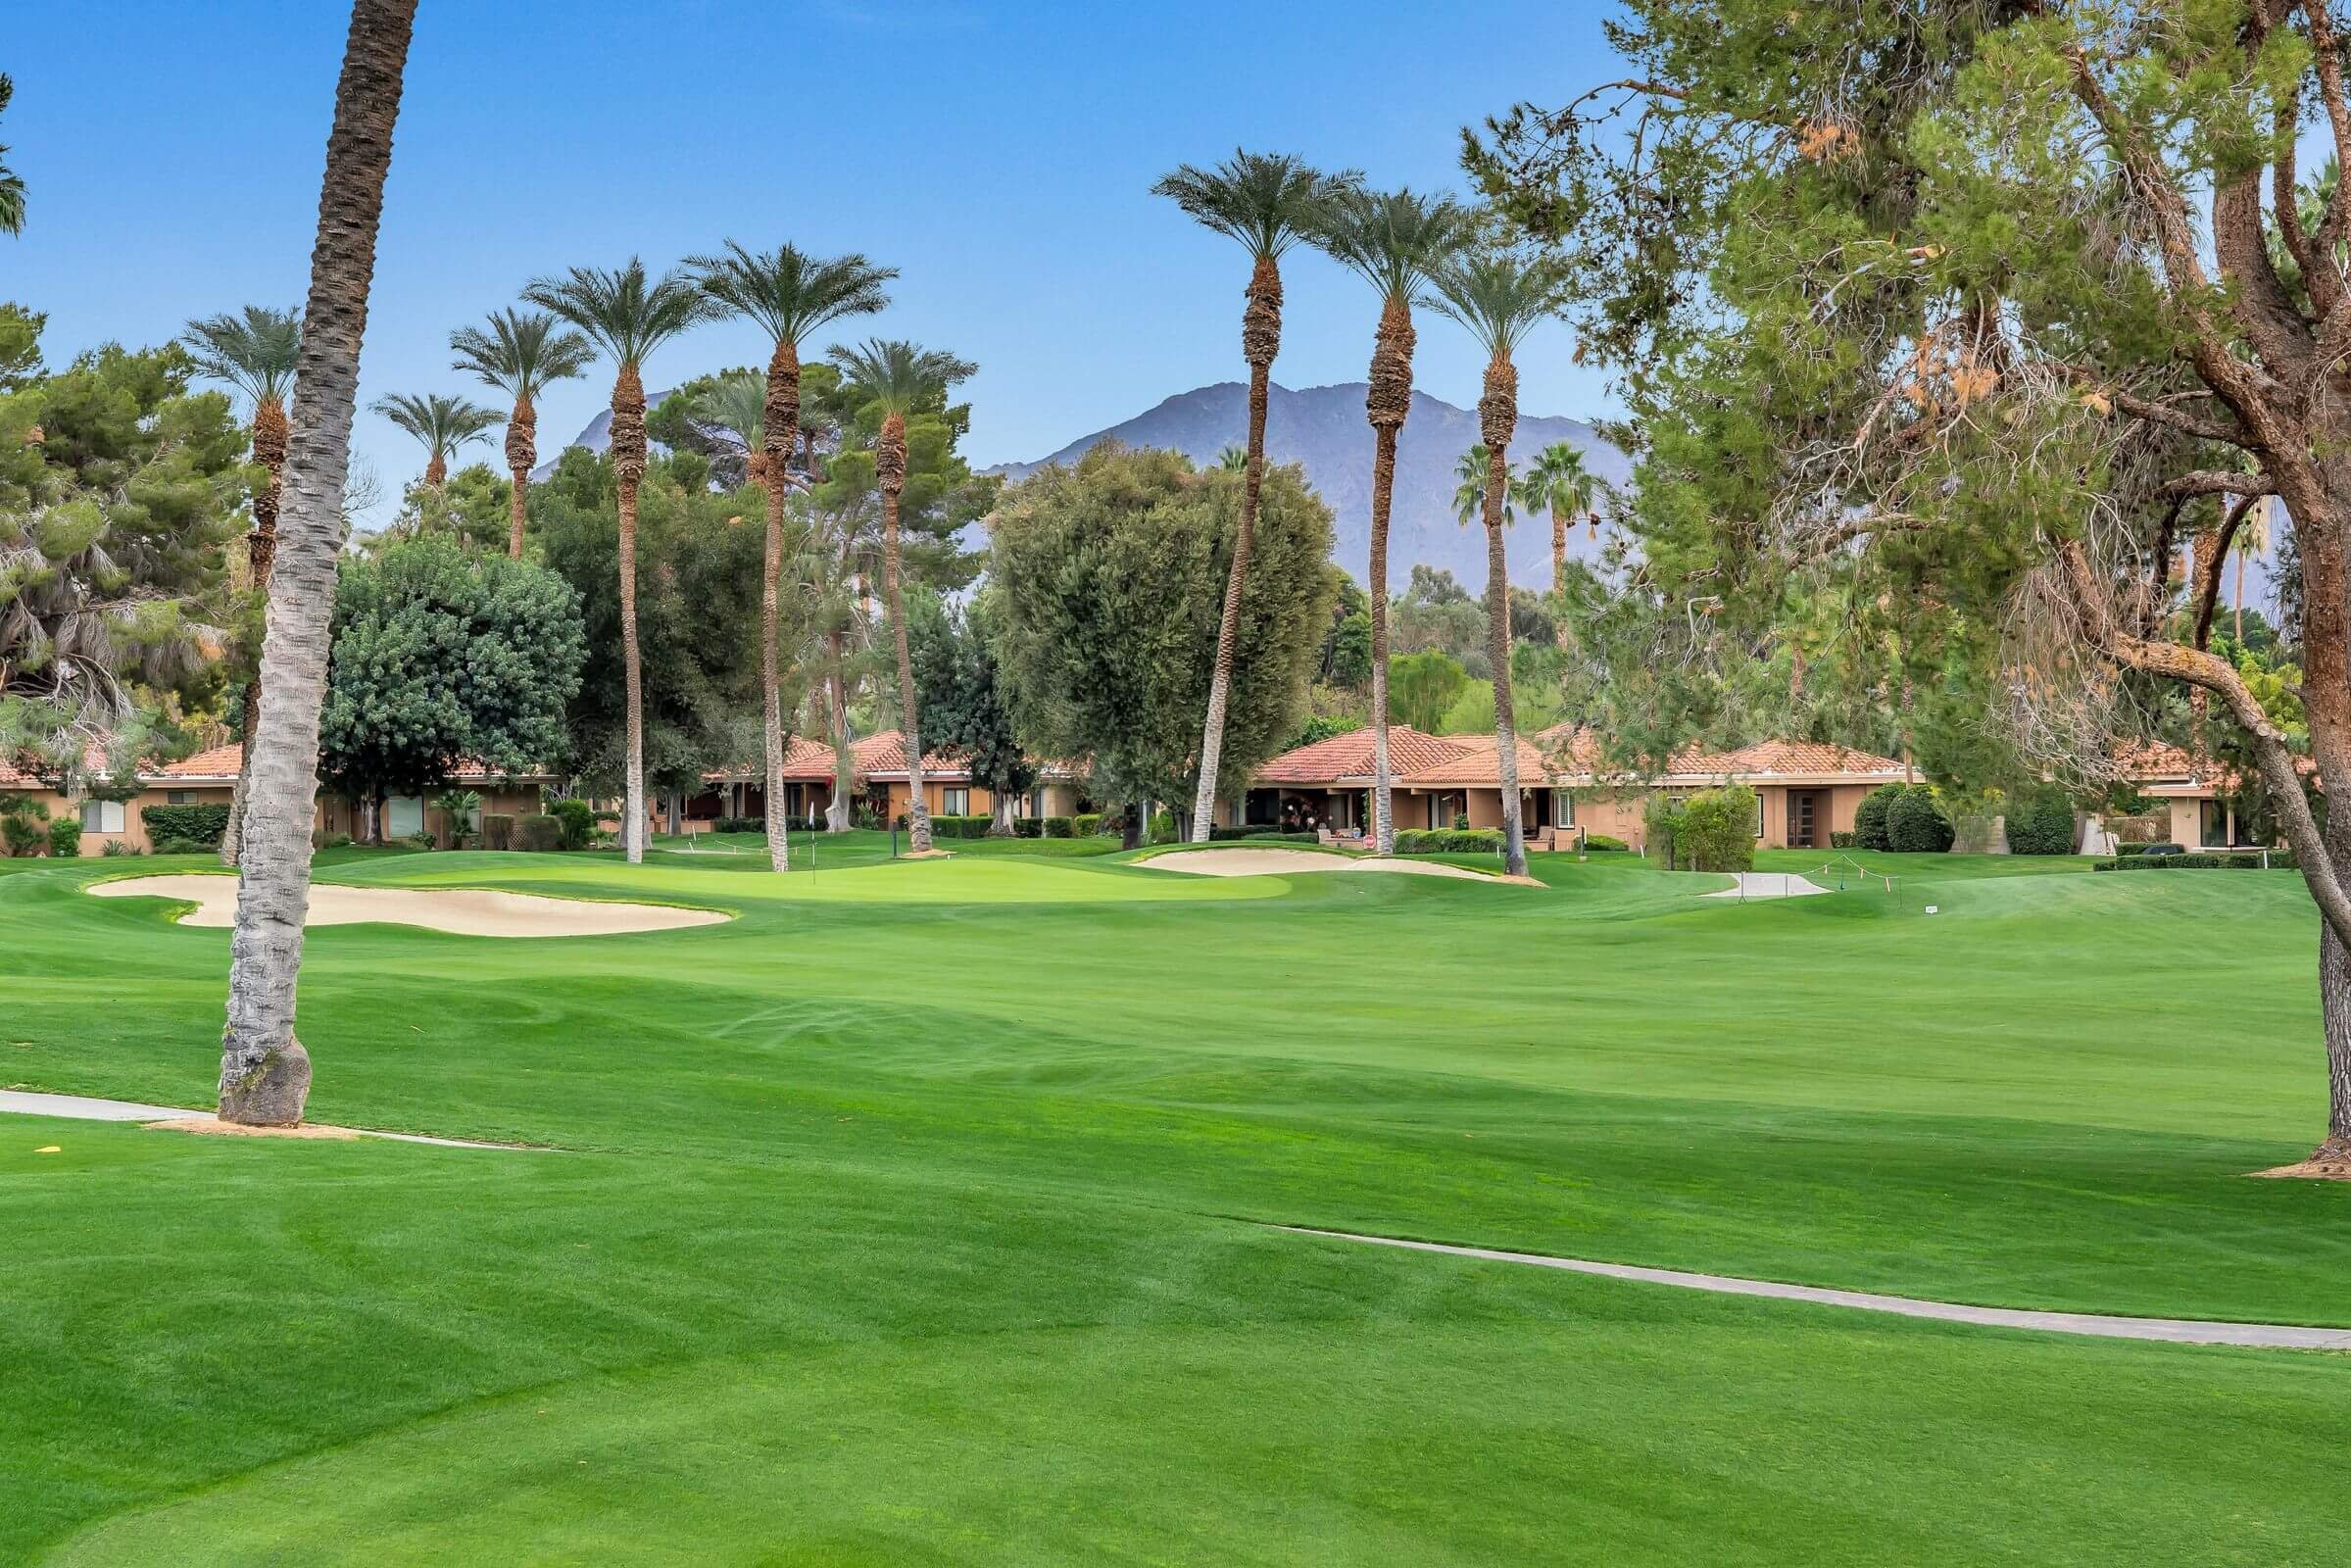 Sunrise Country Club Rancho Mirage 92270